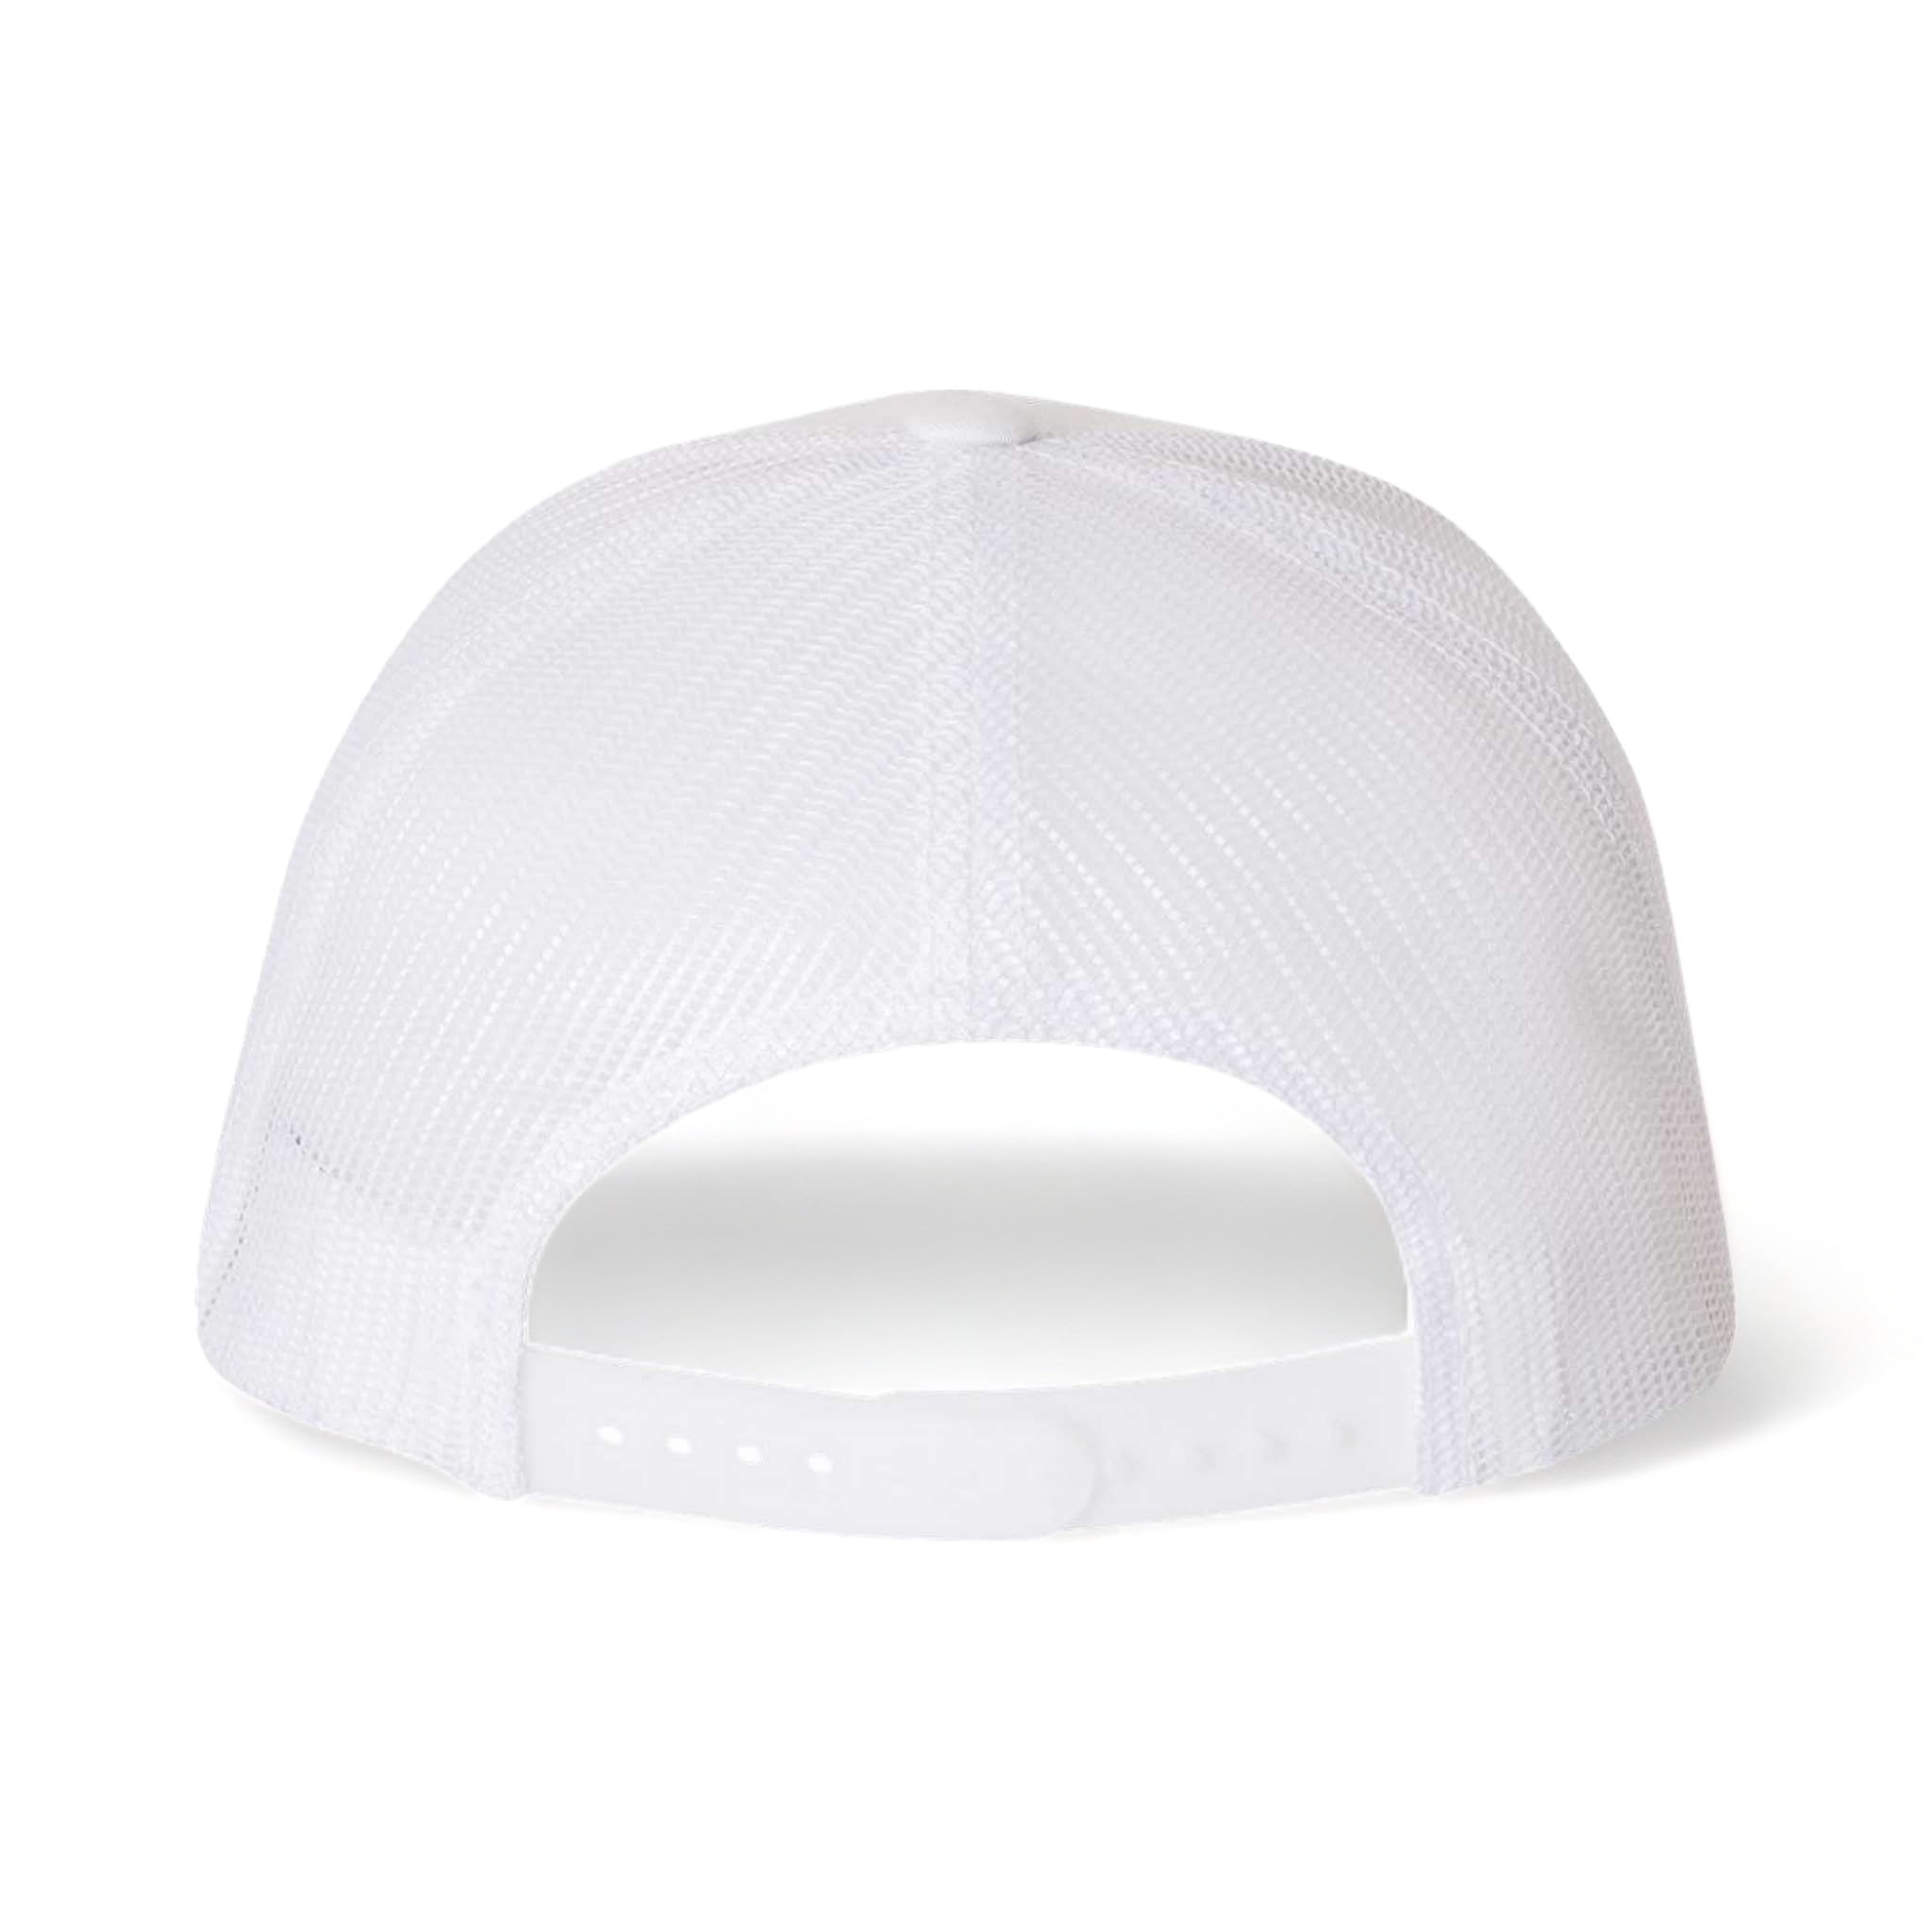 Back view of YP Classics 6506 custom hat in white